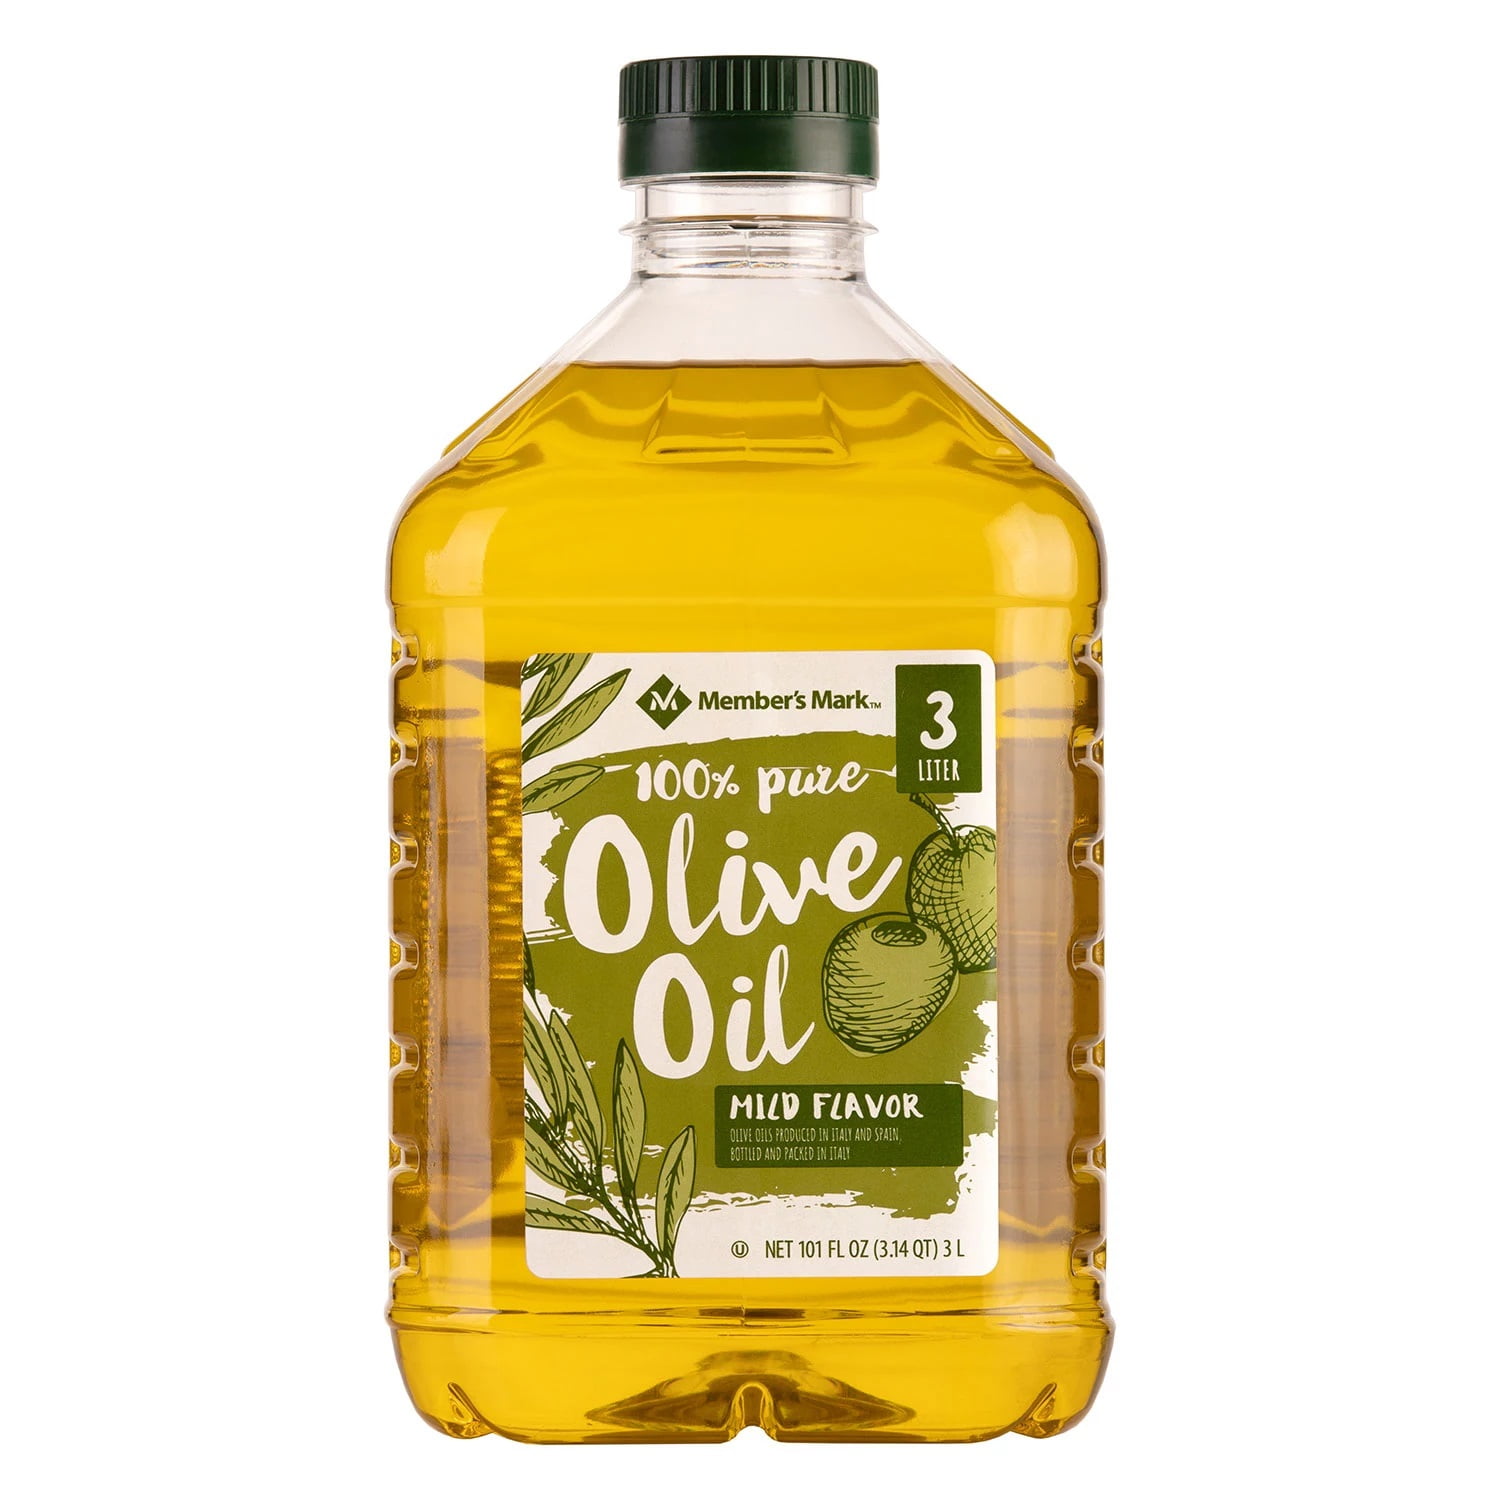 OKAY] 100% PURE OLIVE OIL FOR SKIN AND HAIR 4OZ FREE SHIPPING